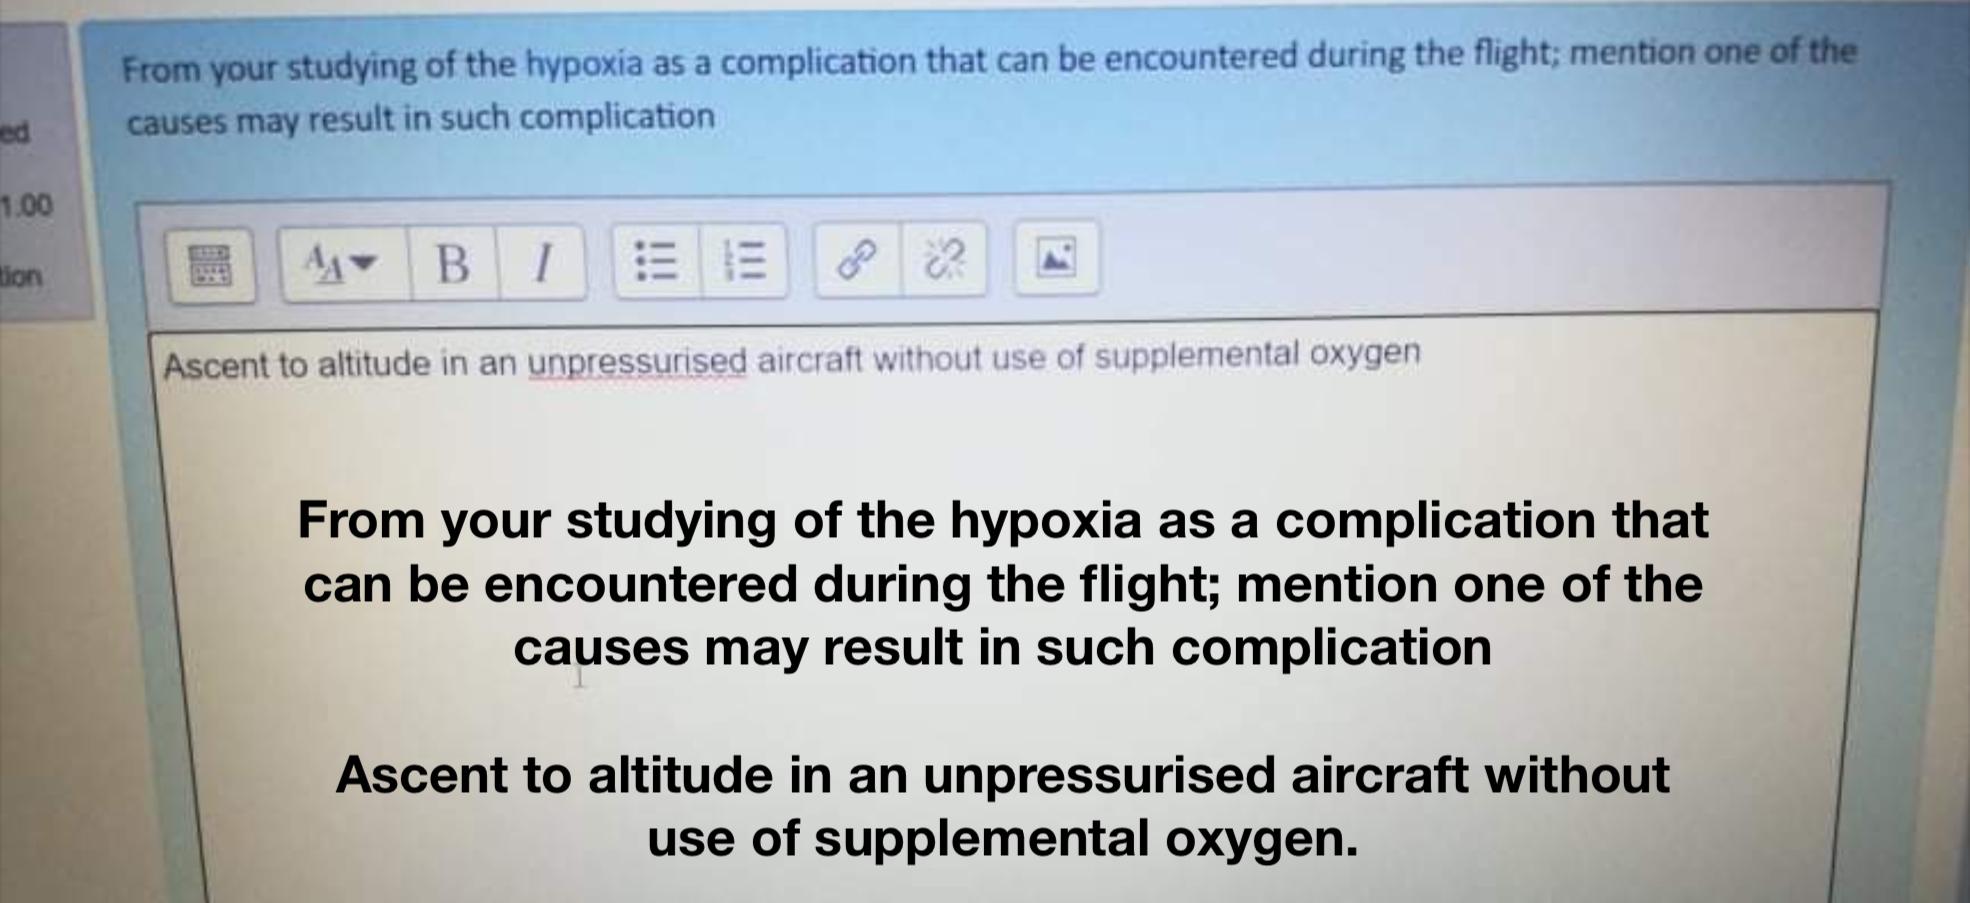 From your studying of the hypoxia as a complication that can be encountered during the flight; mention one of the causes may